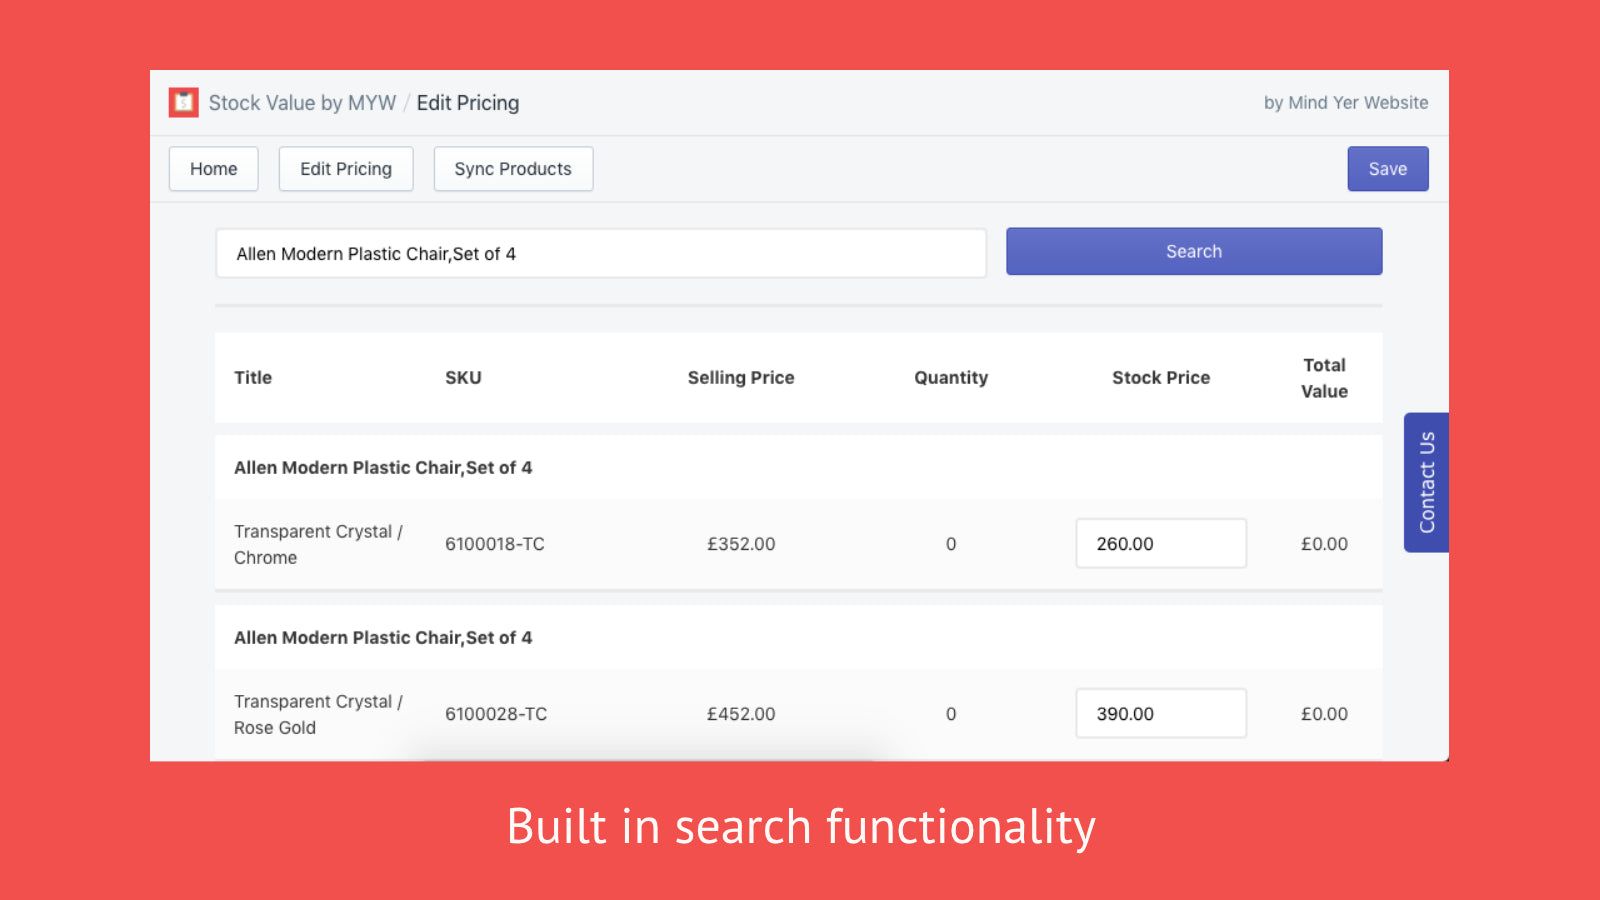 Built in search functionality